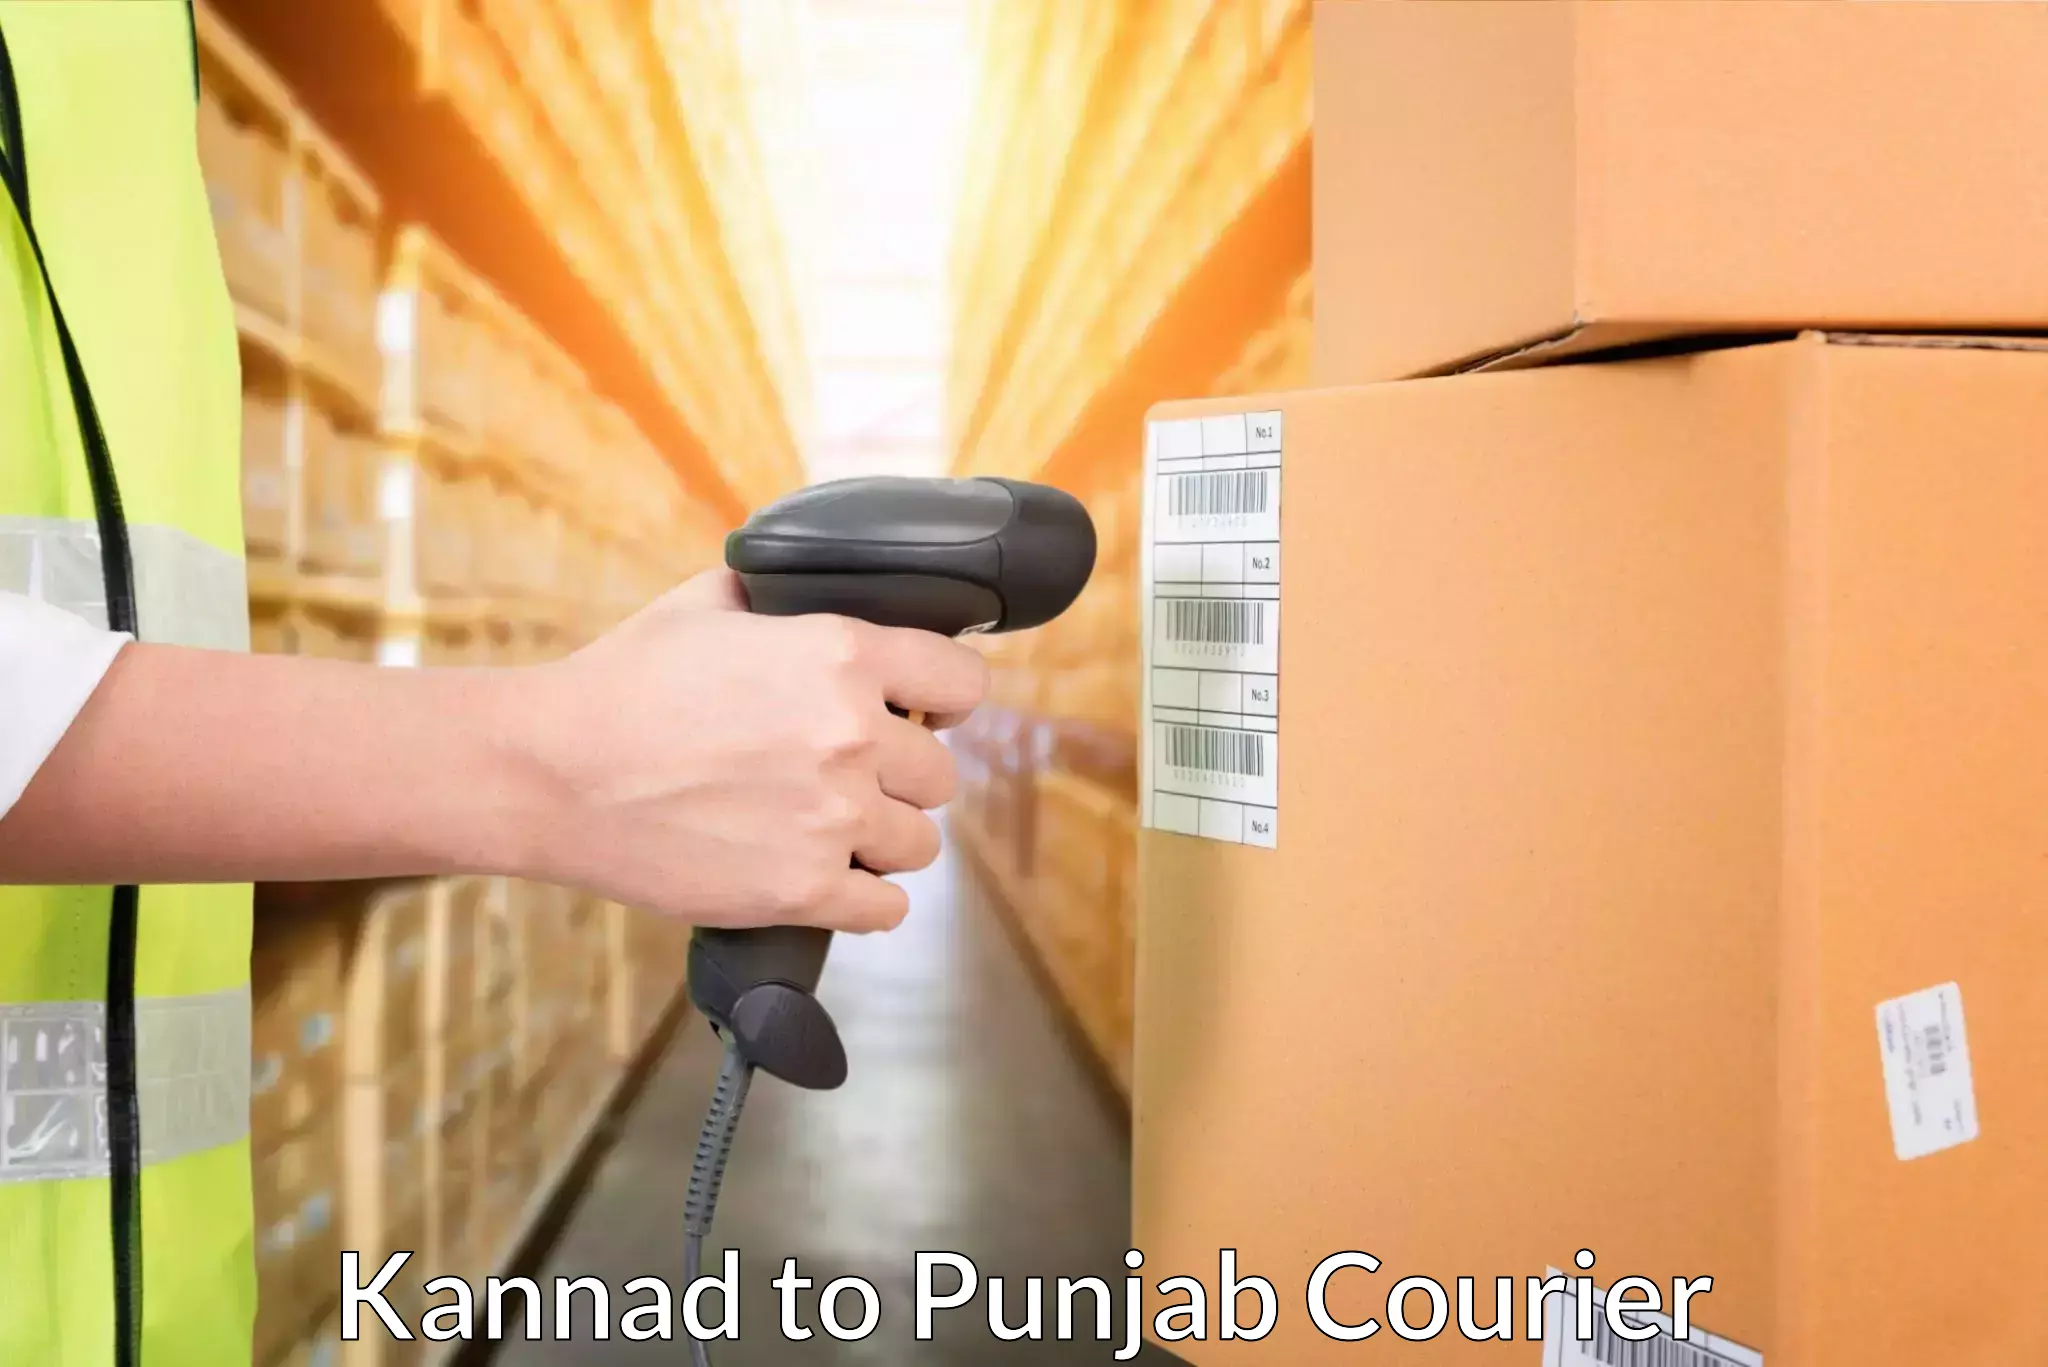 Global courier networks Kannad to Punjab